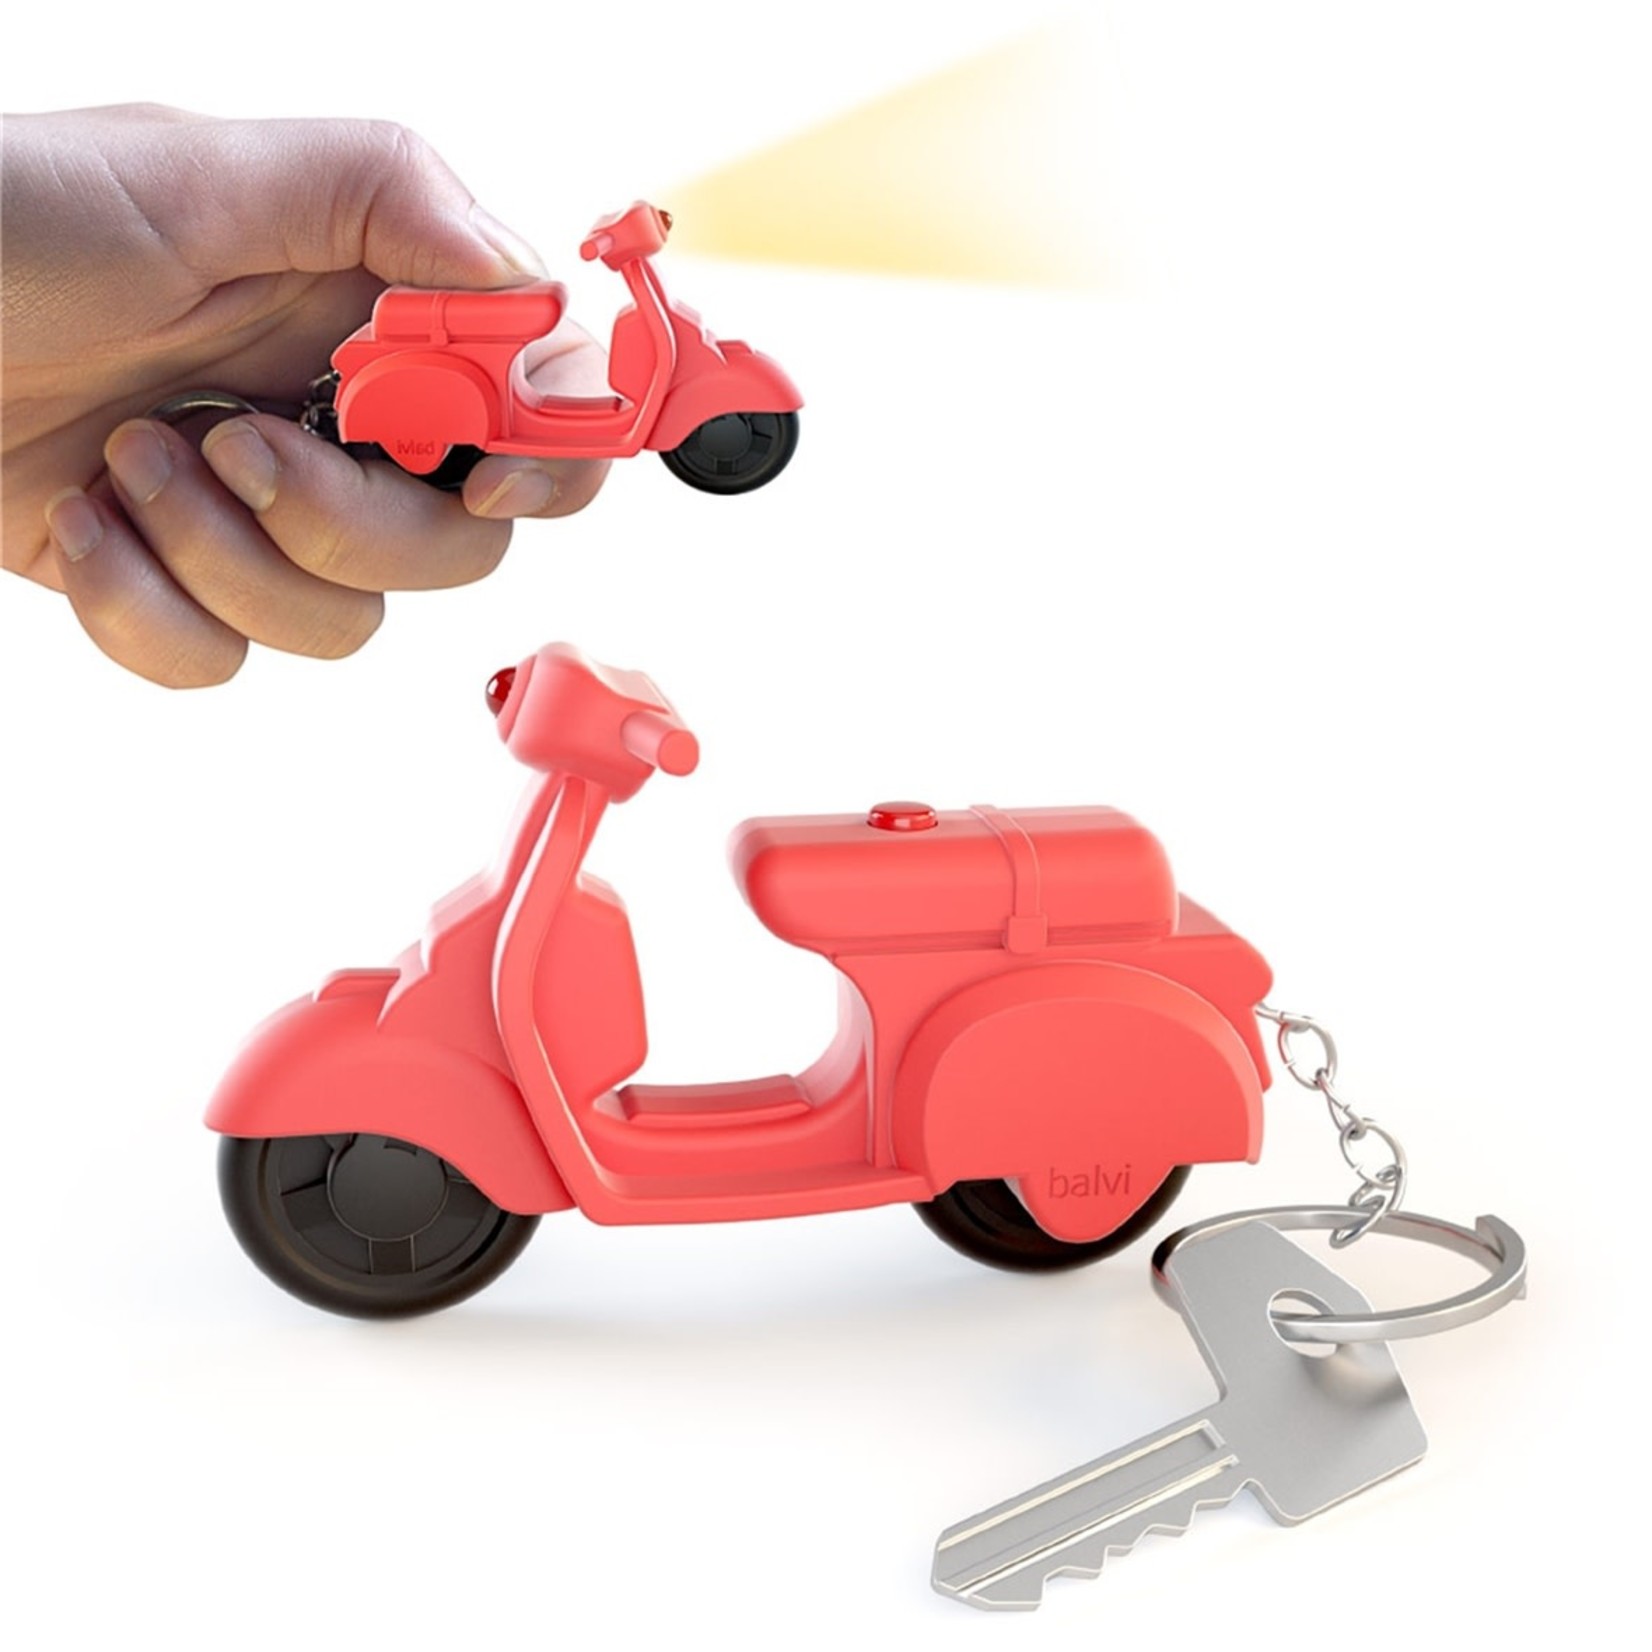 Lifestyle Key Chain, Balvi Red Scooter LED